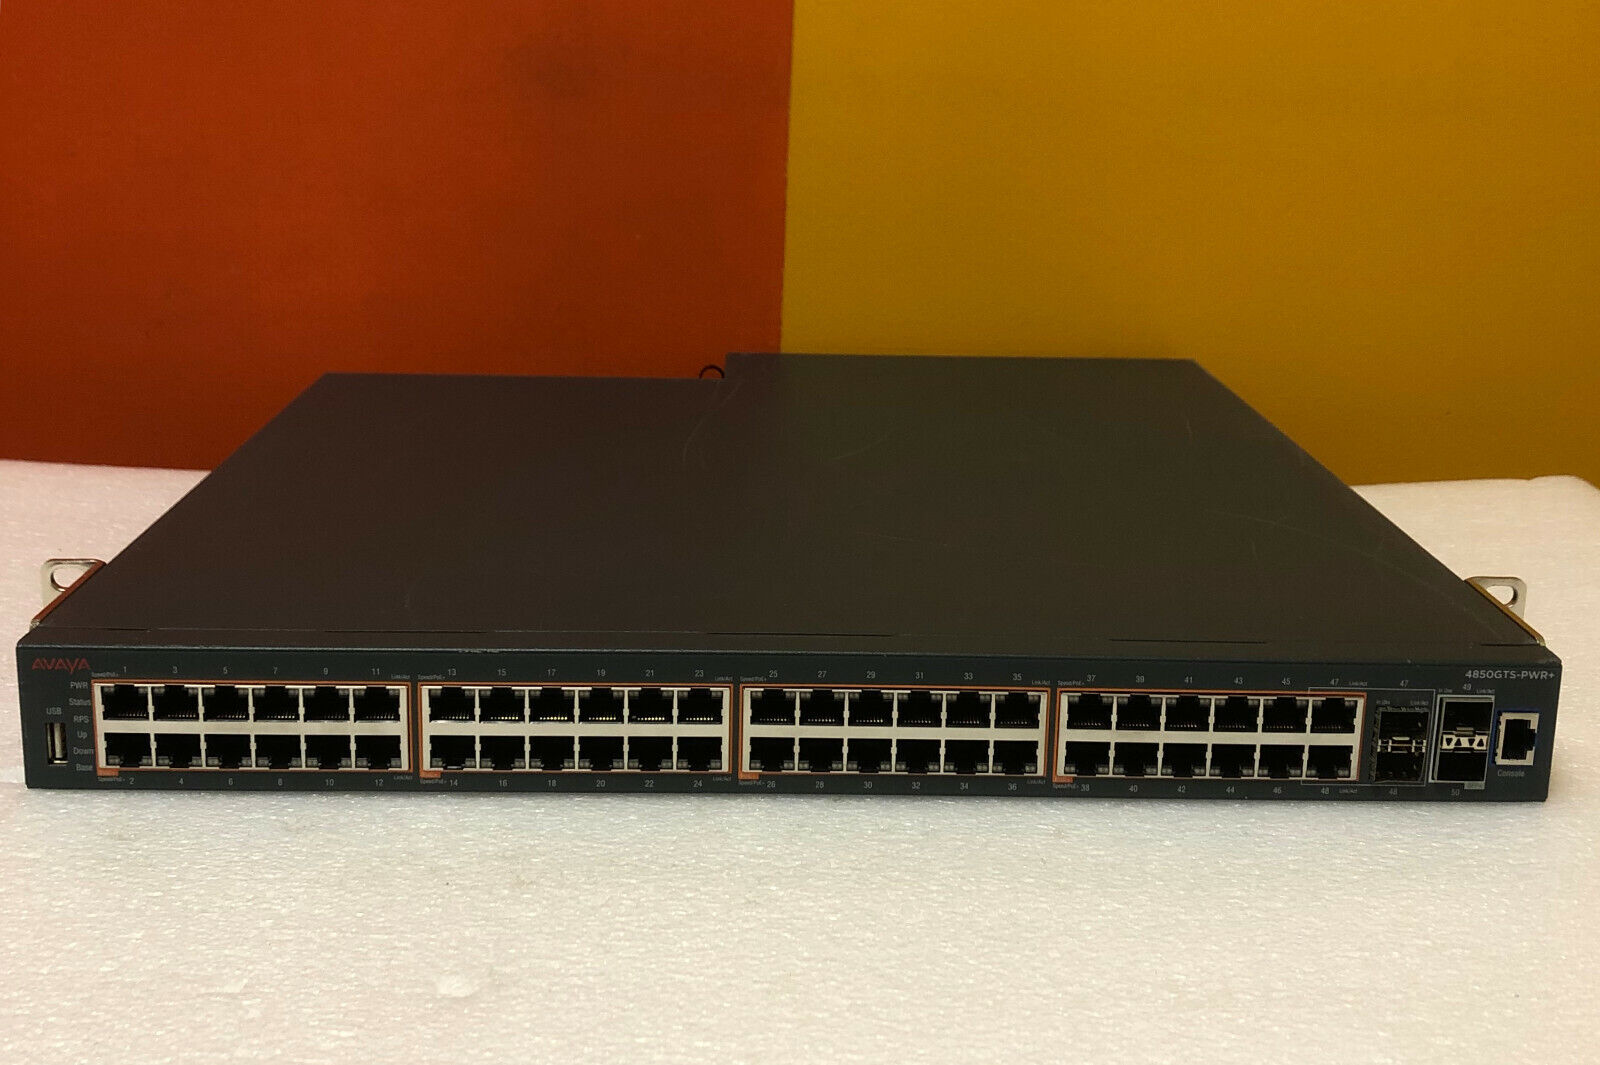 Avaya / Nortel 4850GTS-PWR 48-Port Ethernet Switch + 2 Power Supplies. Tested